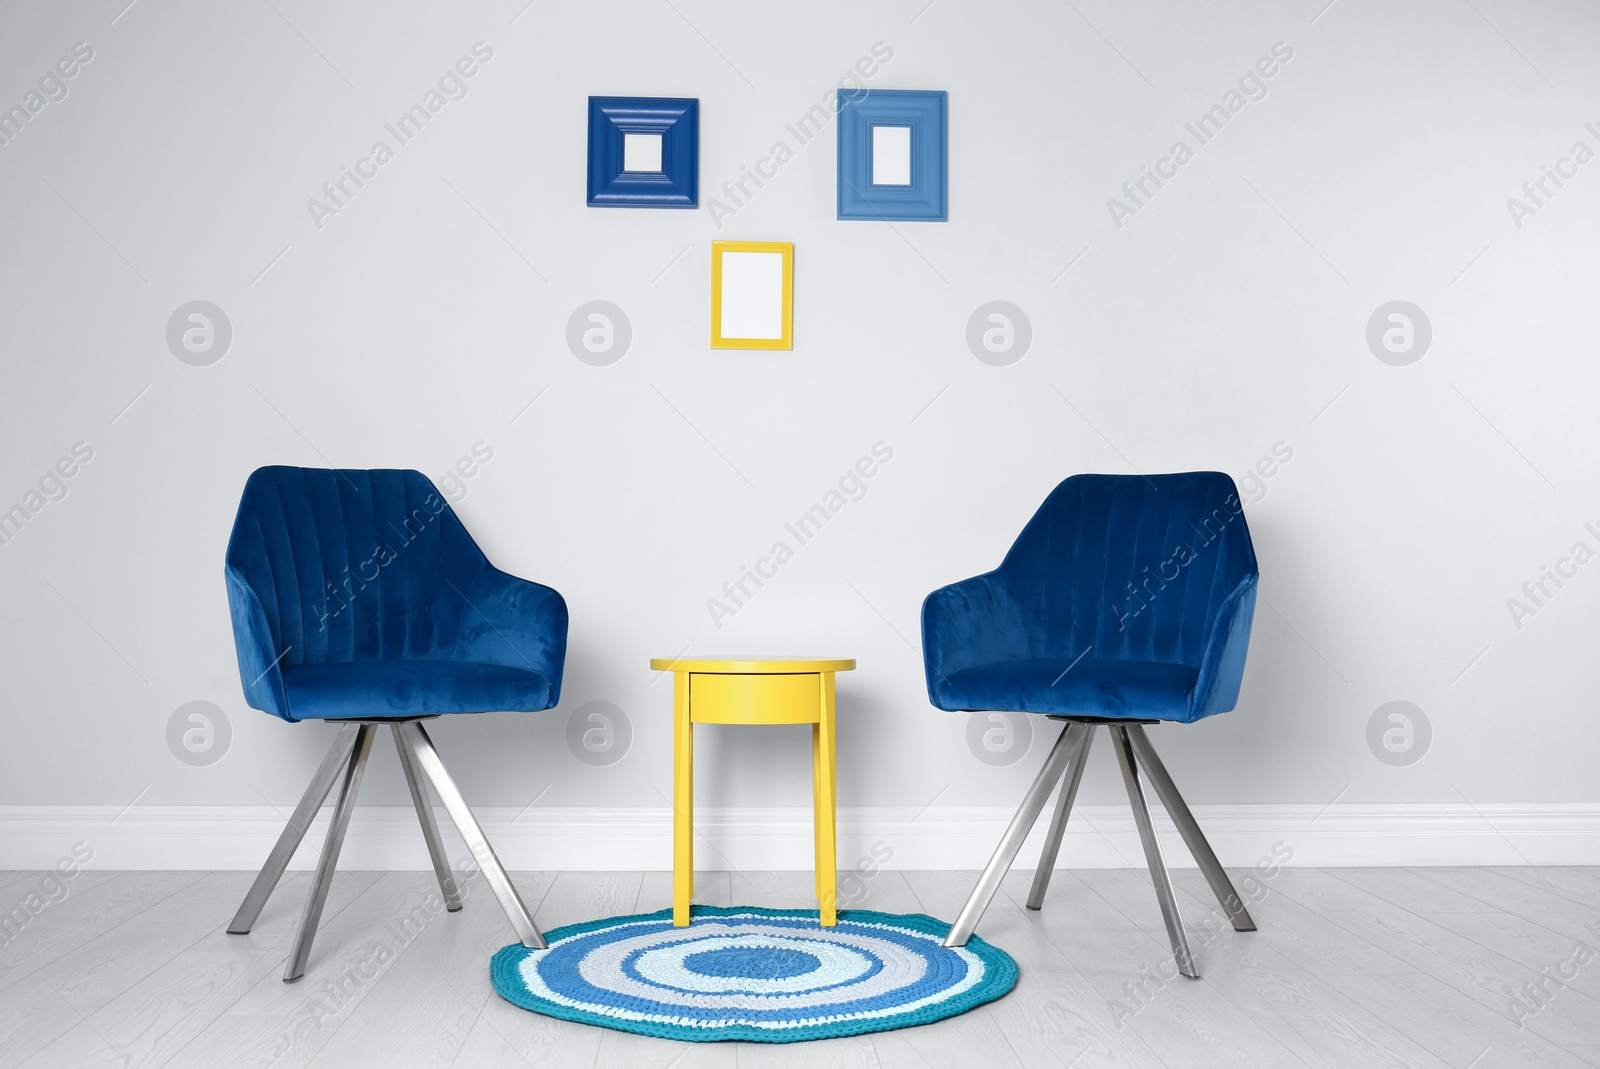 Photo of Stylish chairs and side table near white wall. Idea for interior design